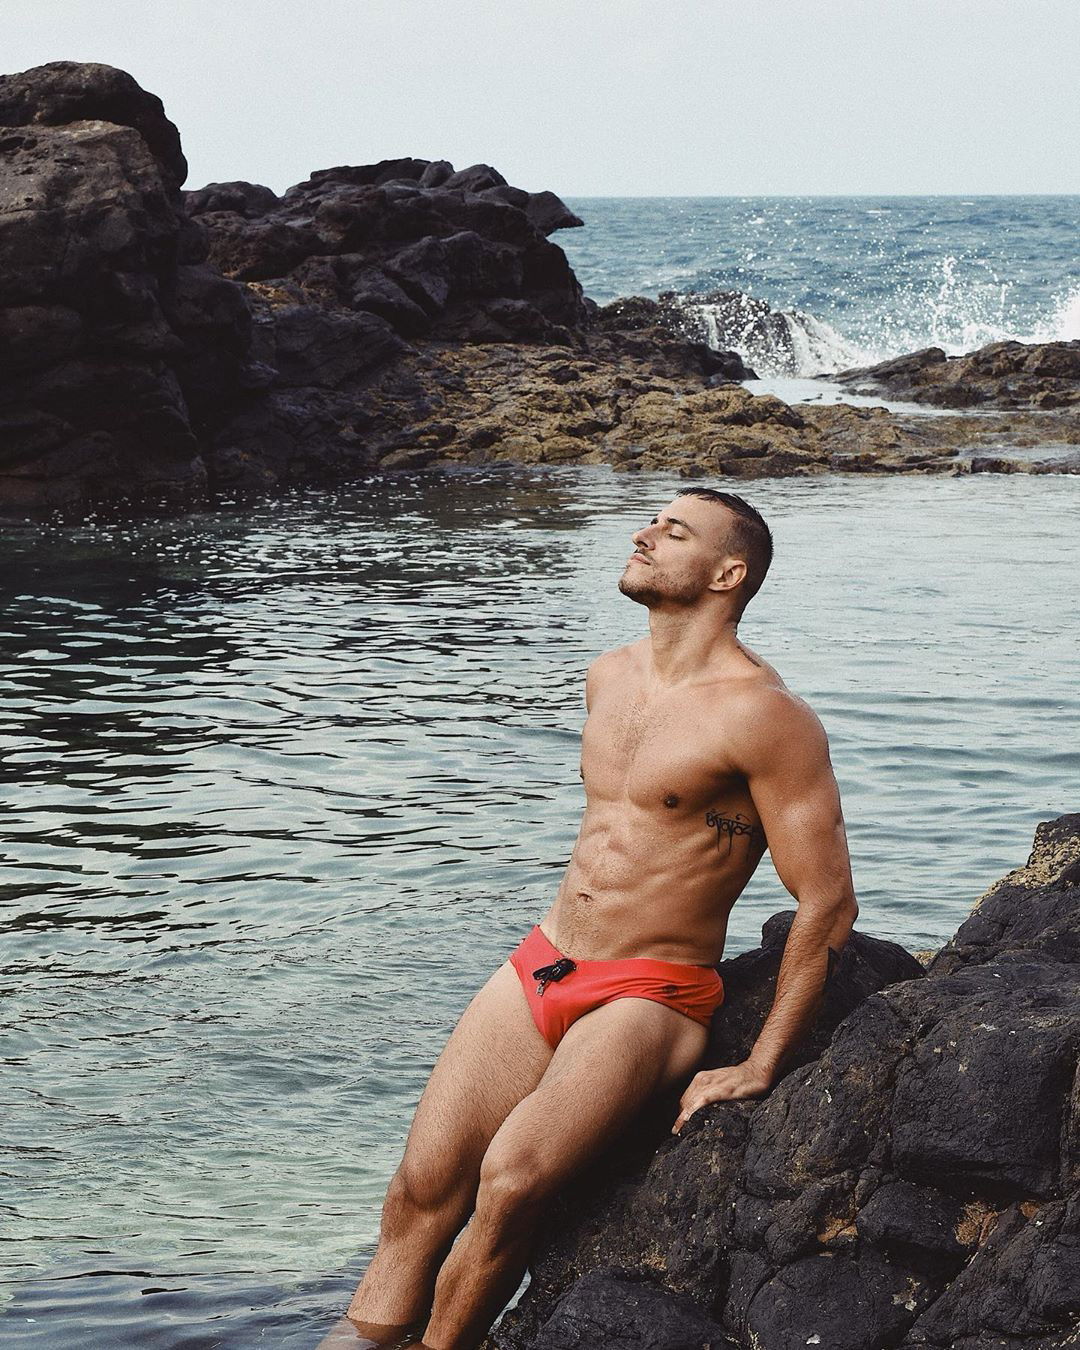 Photo by porn observer with the username @porn_observer,  March 8, 2020 at 12:32 AM. The post is about the topic Gay and the text says 'Hot guys in speedos #gay #speedo #hotguys #hotgayguys'